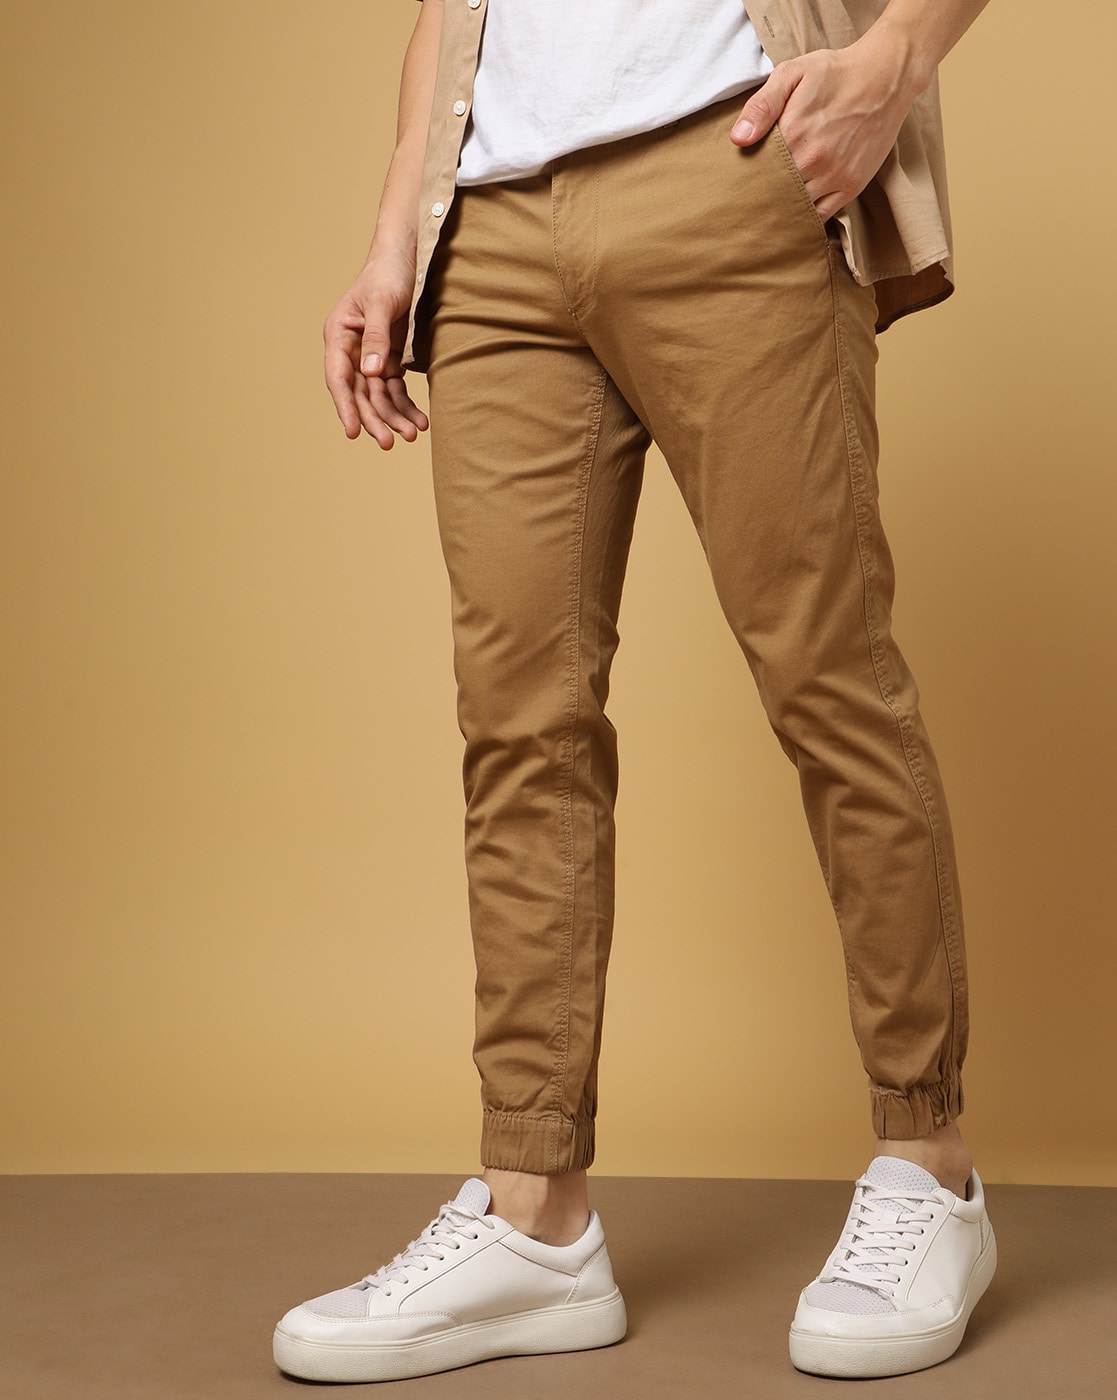 Louis Philippe Khaki Trousers Buy Louis Philippe Khaki Trousers Online at  Best Price in India  NykaaMan